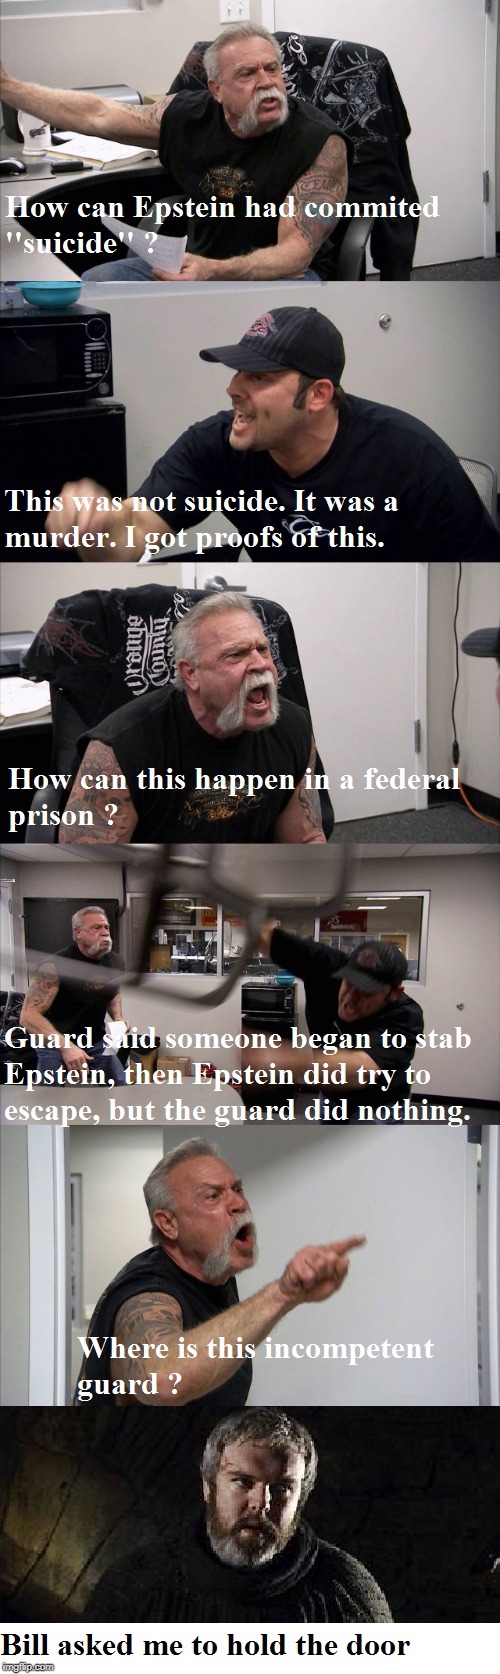 Hodor is a hero again !!! | image tagged in game of thrones,american chopper argument,jeffrey epstein,hodor,conspiracy theory | made w/ Imgflip meme maker